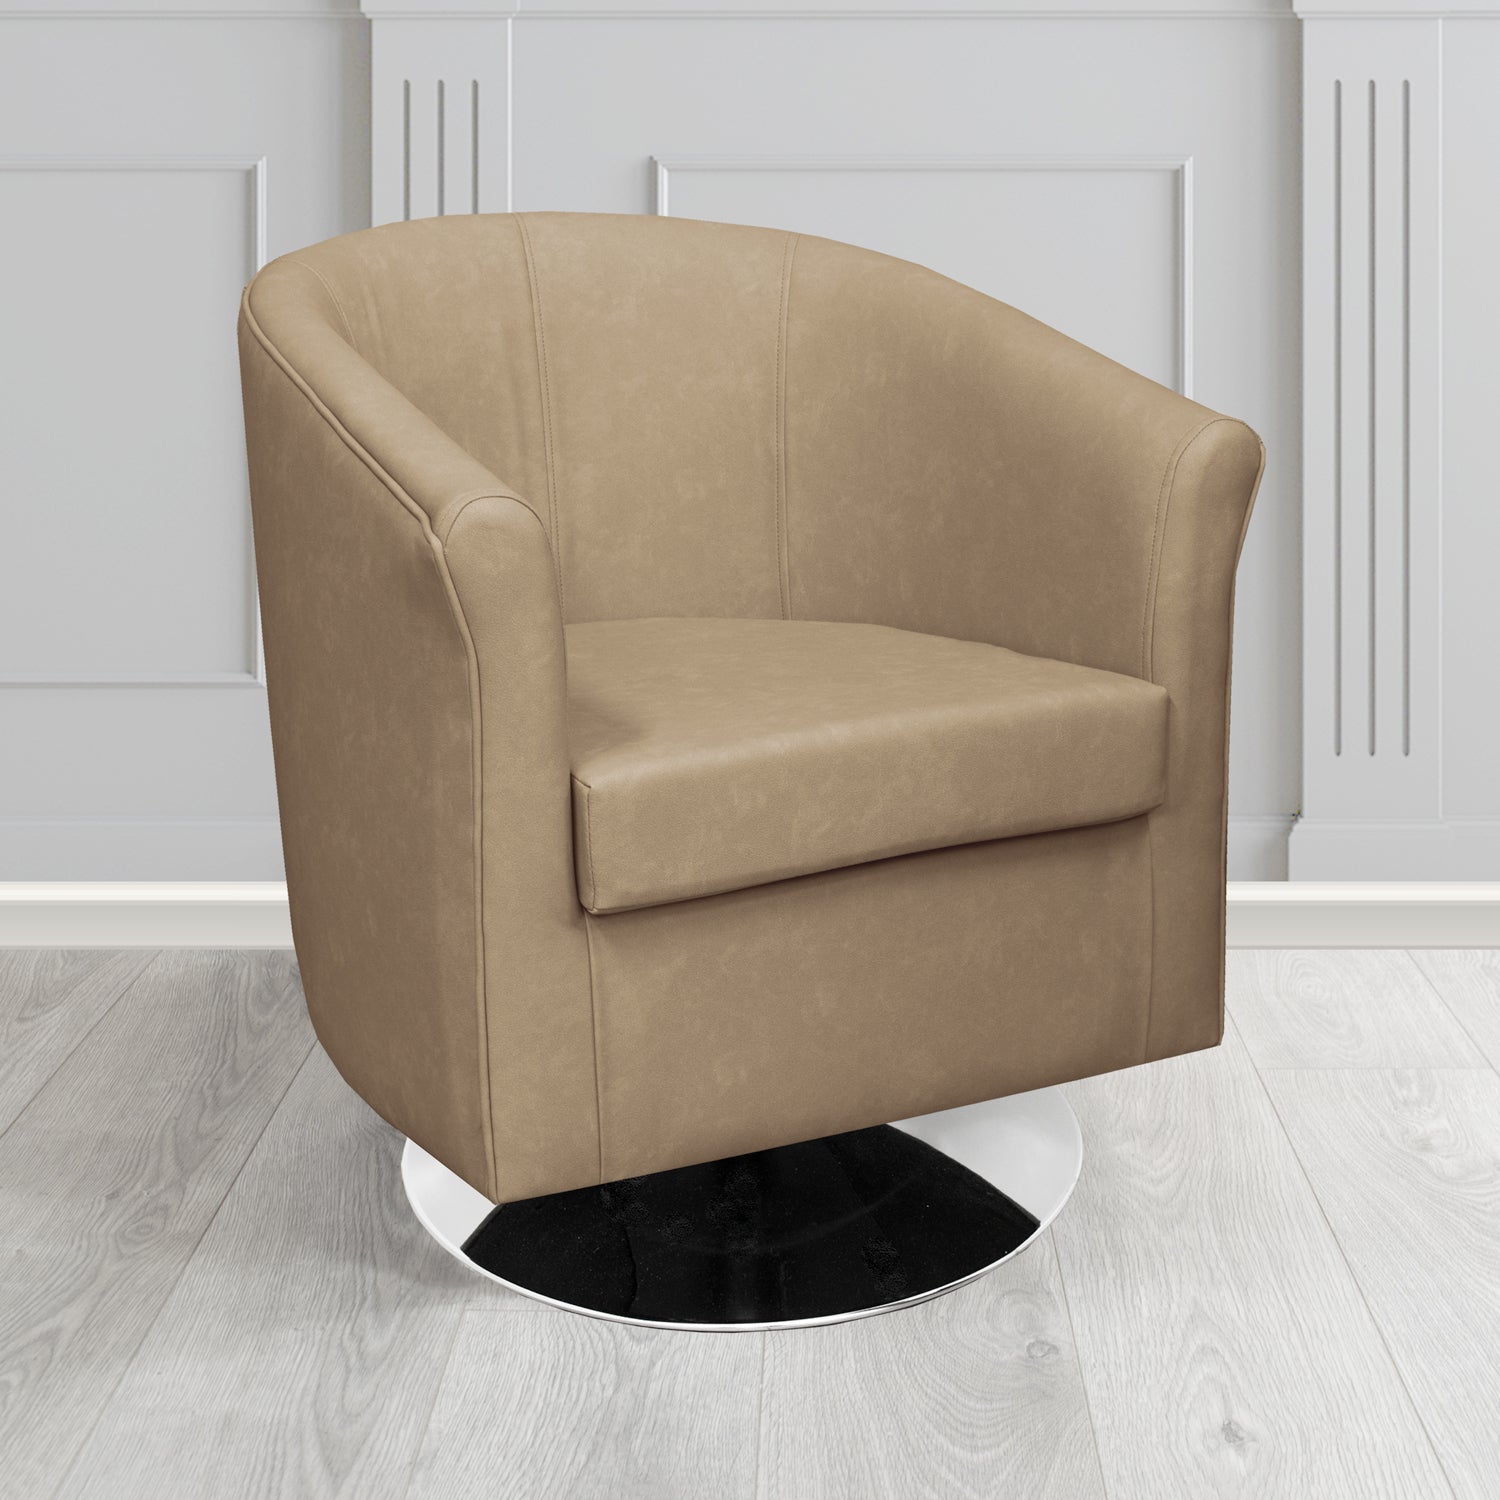 Tuscany Swivel Tub Chair in Infiniti Caramel INF1847 Antimicrobial Crib 5 Faux Leather - The Tub Chair Shop